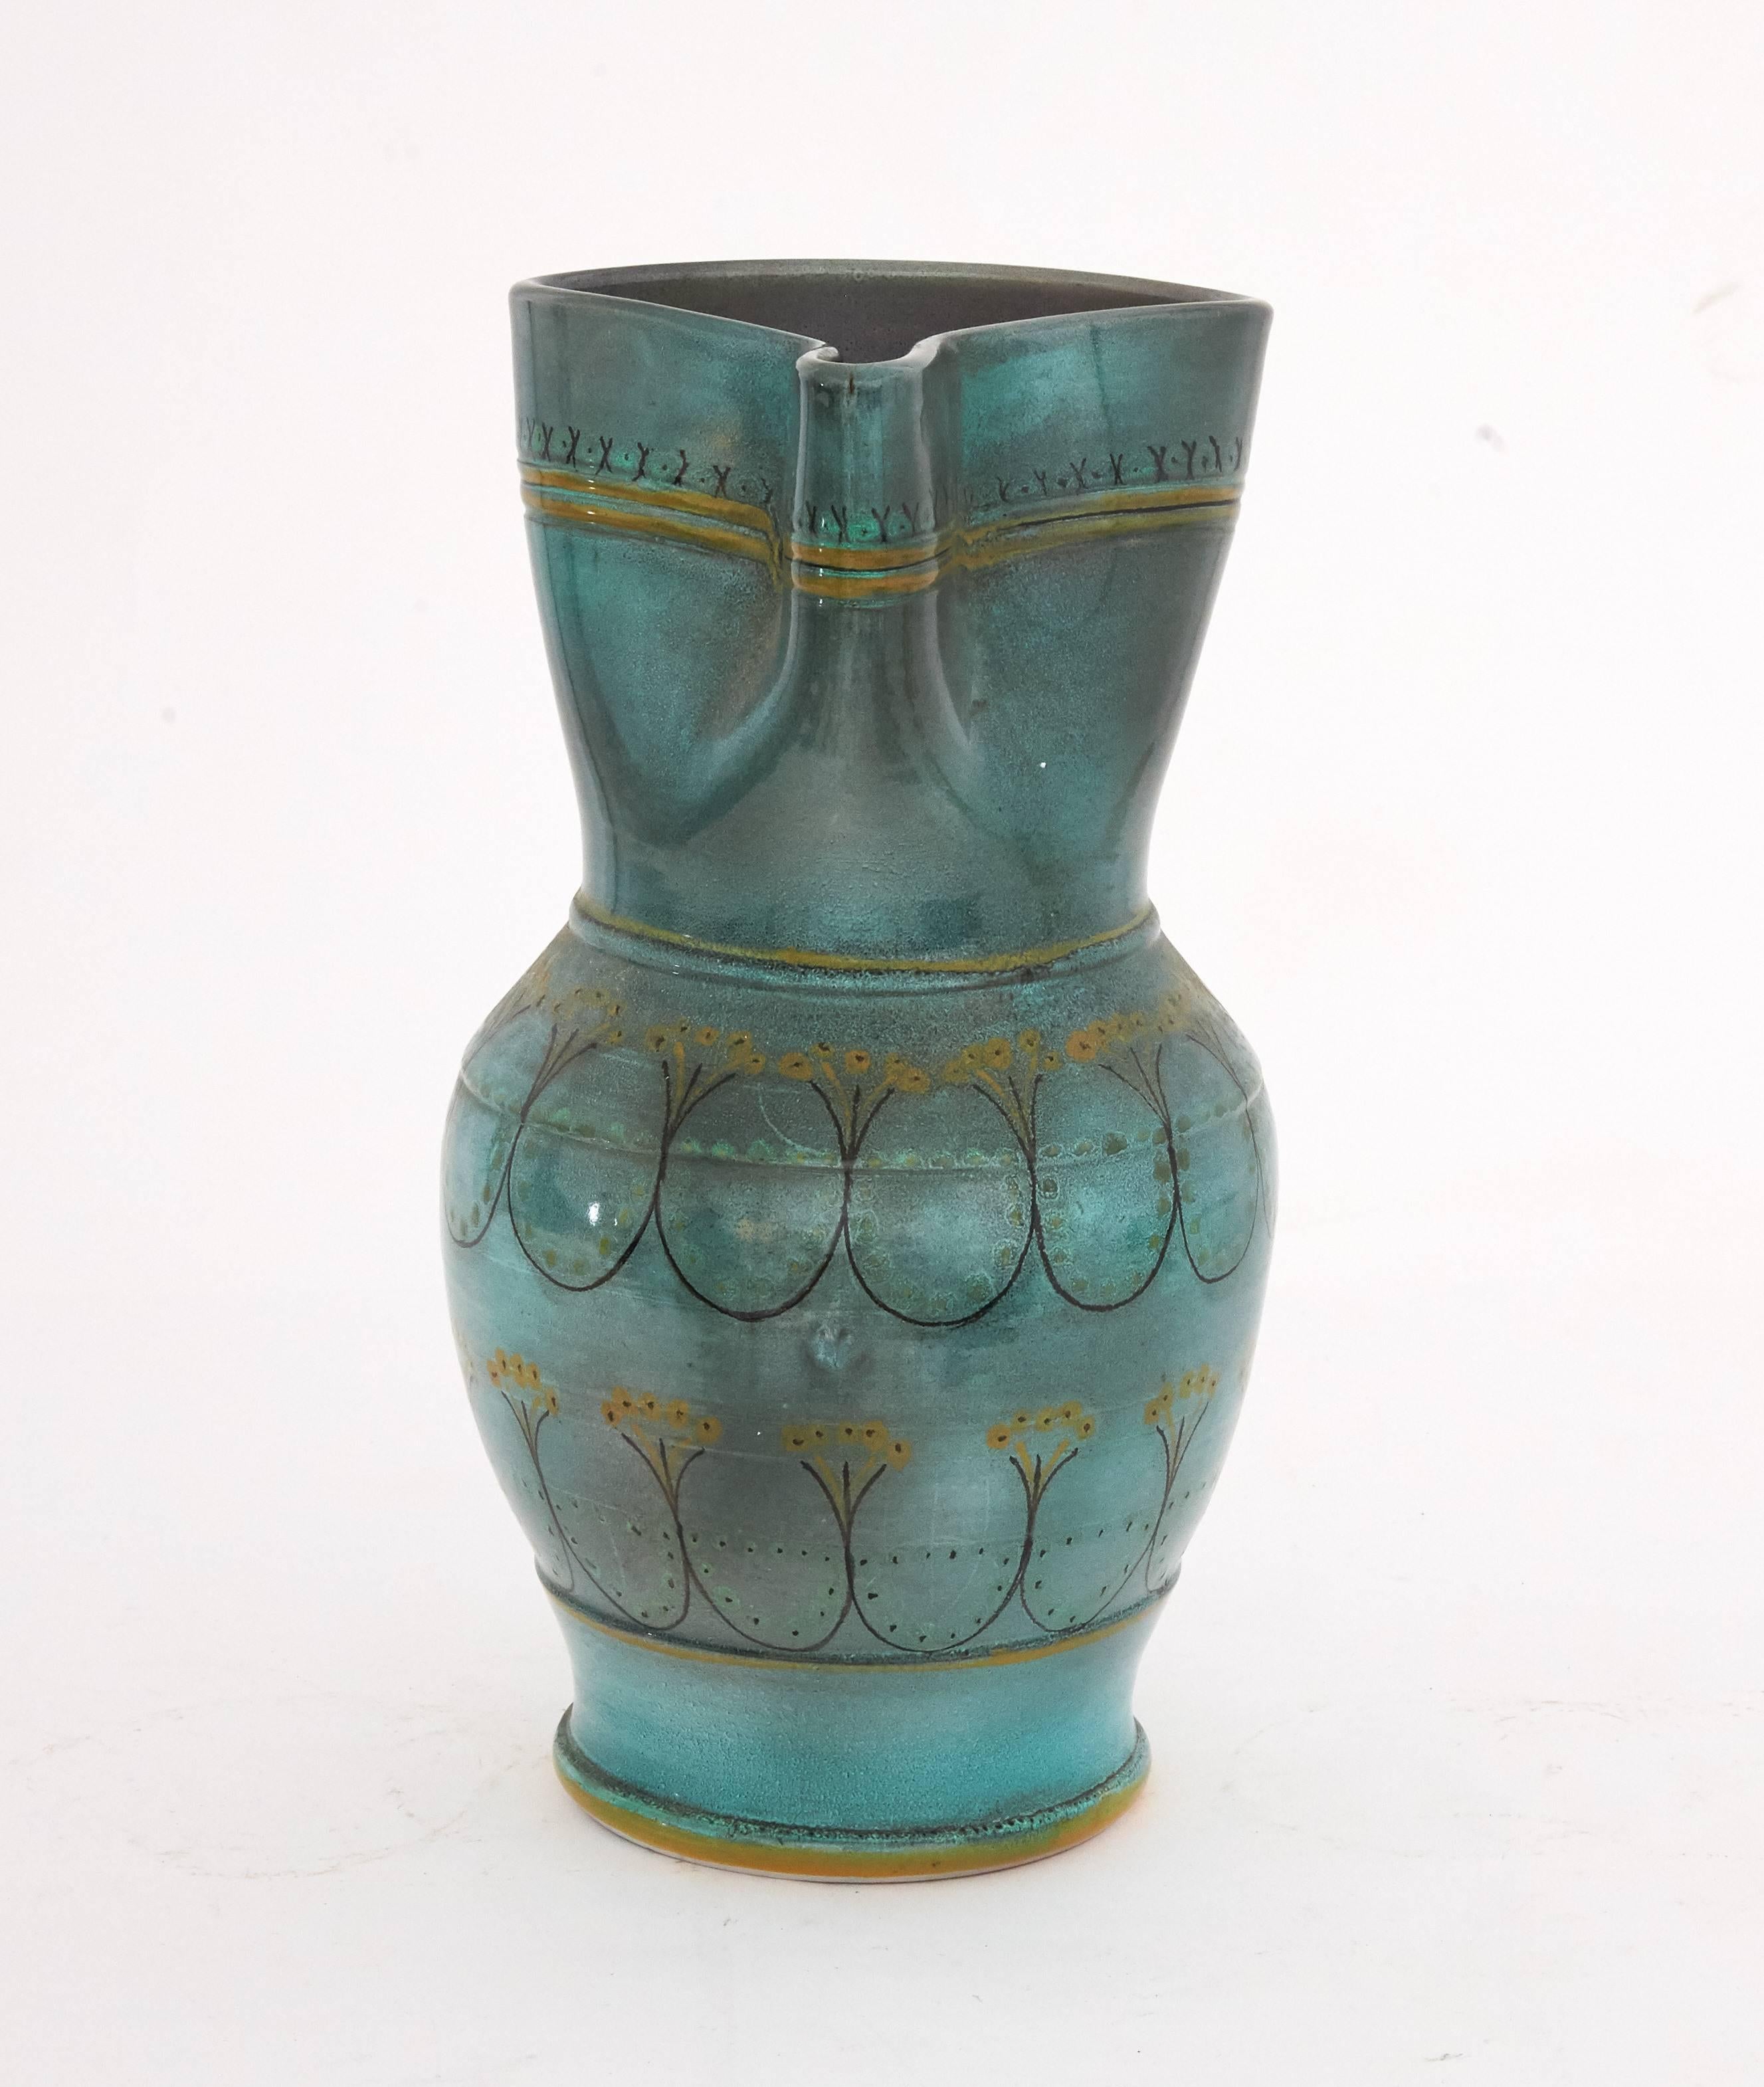 This very rare, large ceramic water pitcher is typical of Mediterranean pottery in the late 19th / early 20th century time. The pitcher was handcrafted and beautifully painted with muted greens, blues and greys, with circular patterns around the